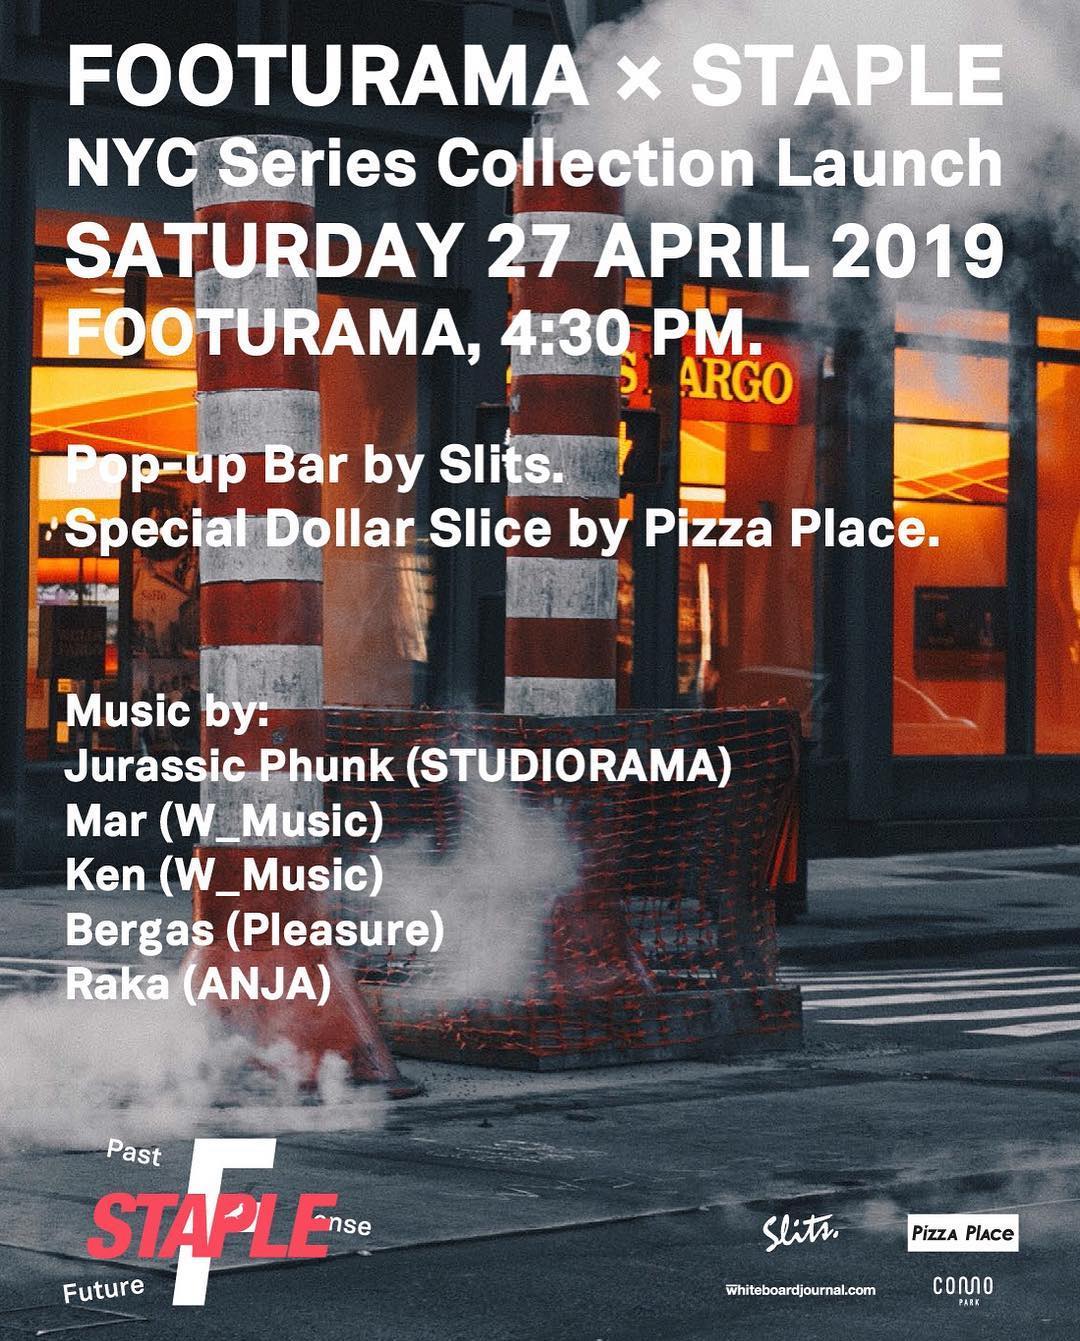 Footurama x Staple NYC Series Collection Launch - Whiteboard Journal